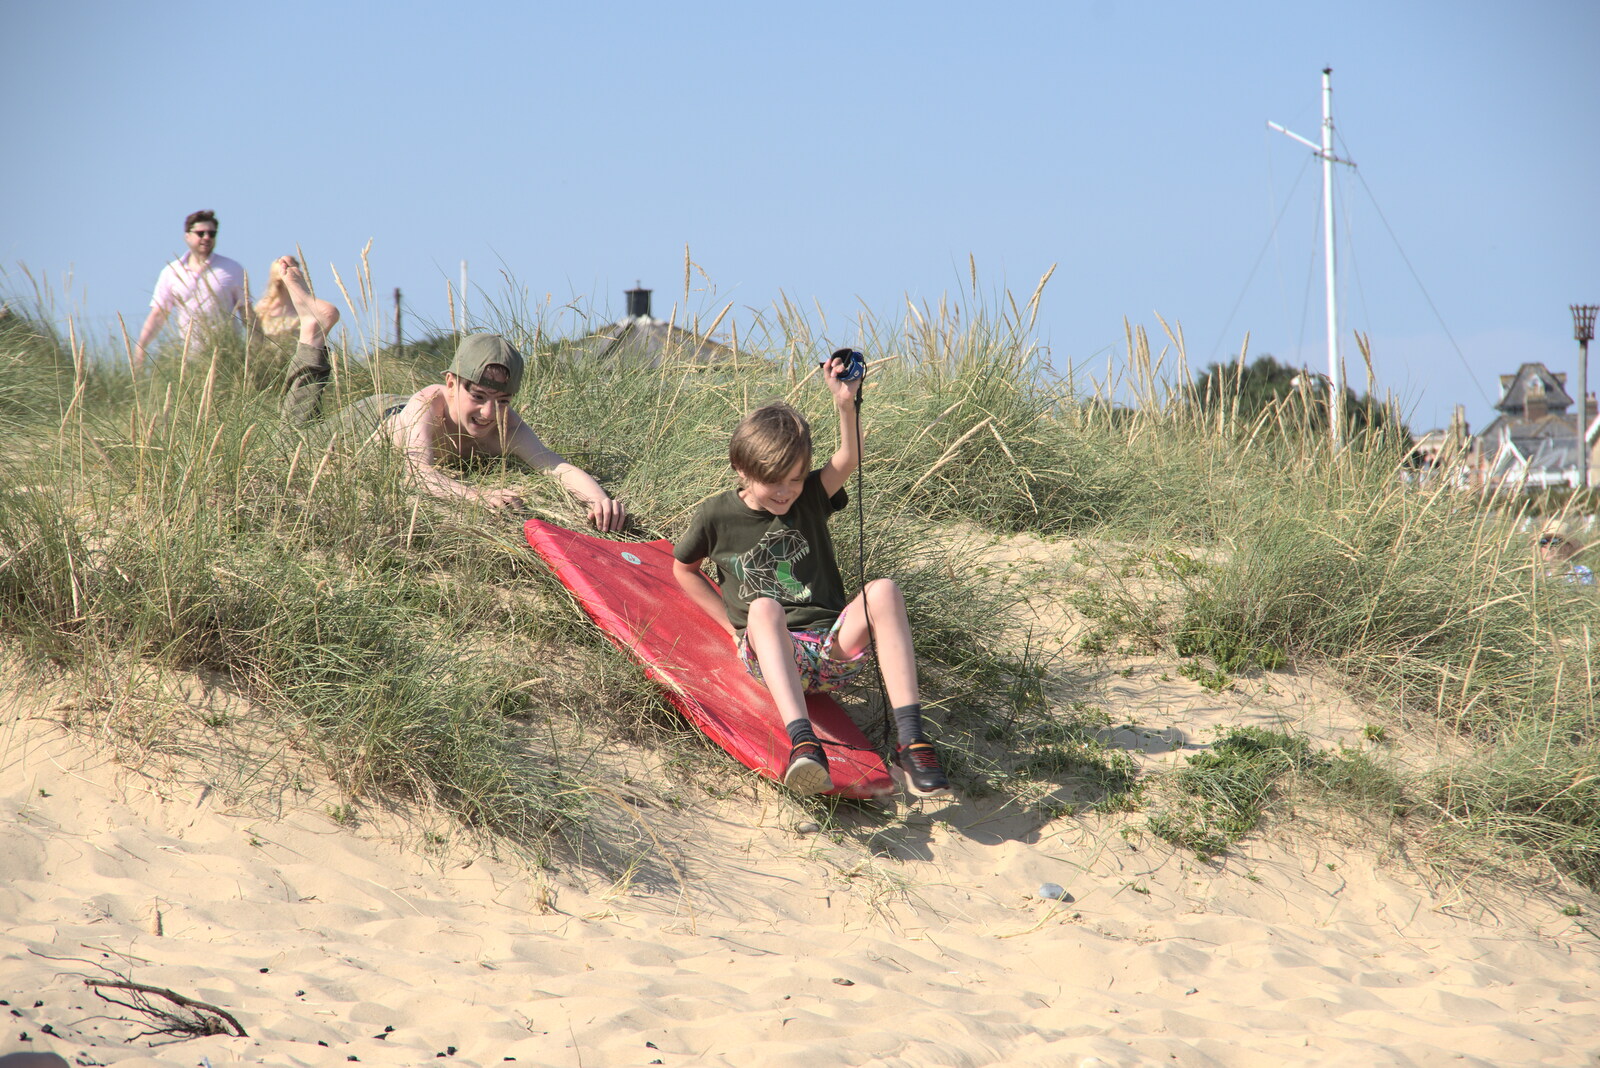 Harry gets a push down the dunes on a body board from A Day on the Beach, Southwold, Suffolk - 18th July 2021